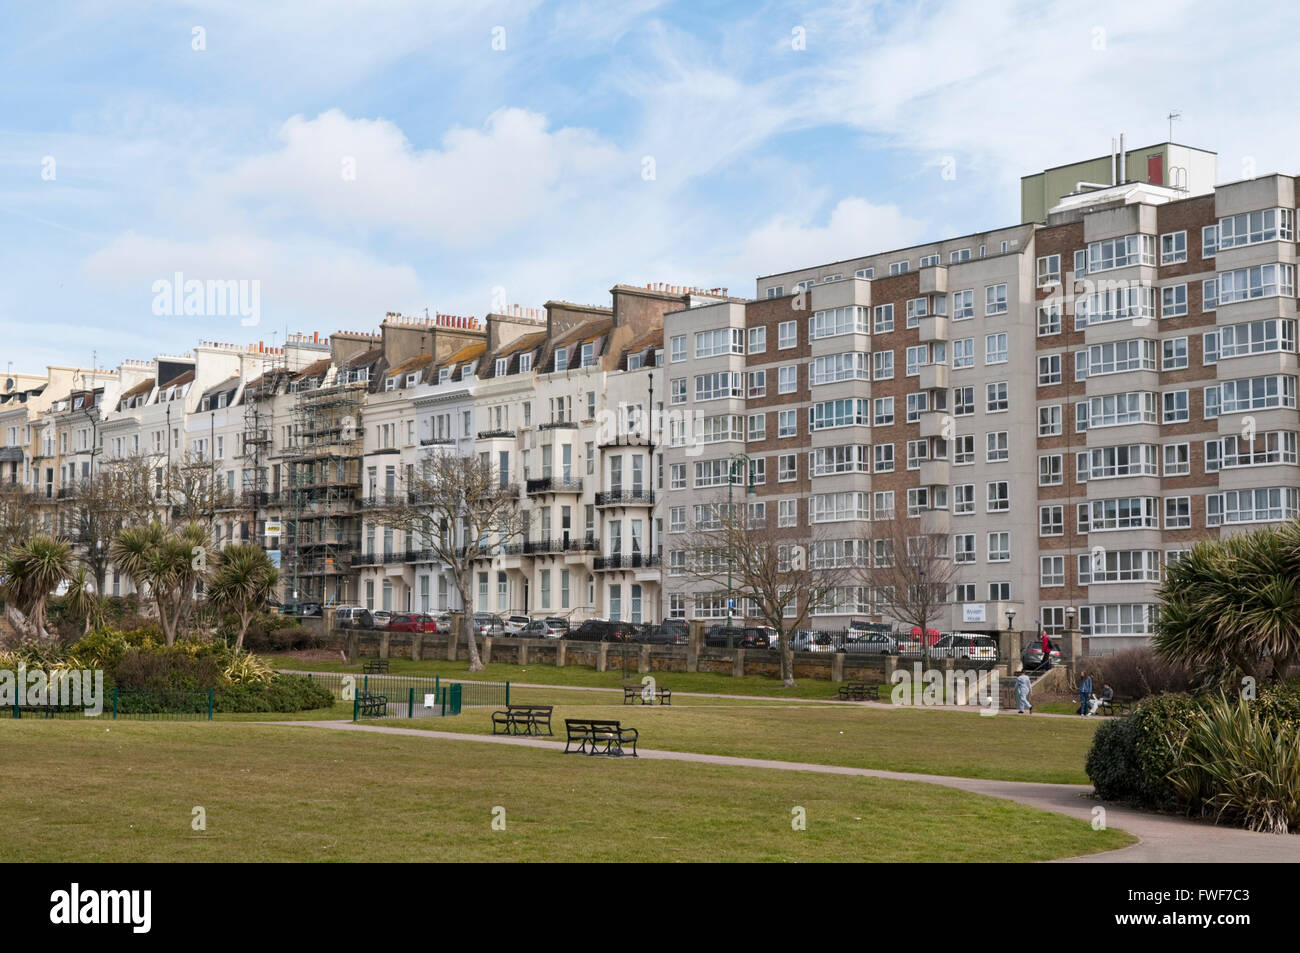 Apartment buildings overlooking the park at Warrior Square, St Leonards-on-Sea, East Sussex Stock Photo